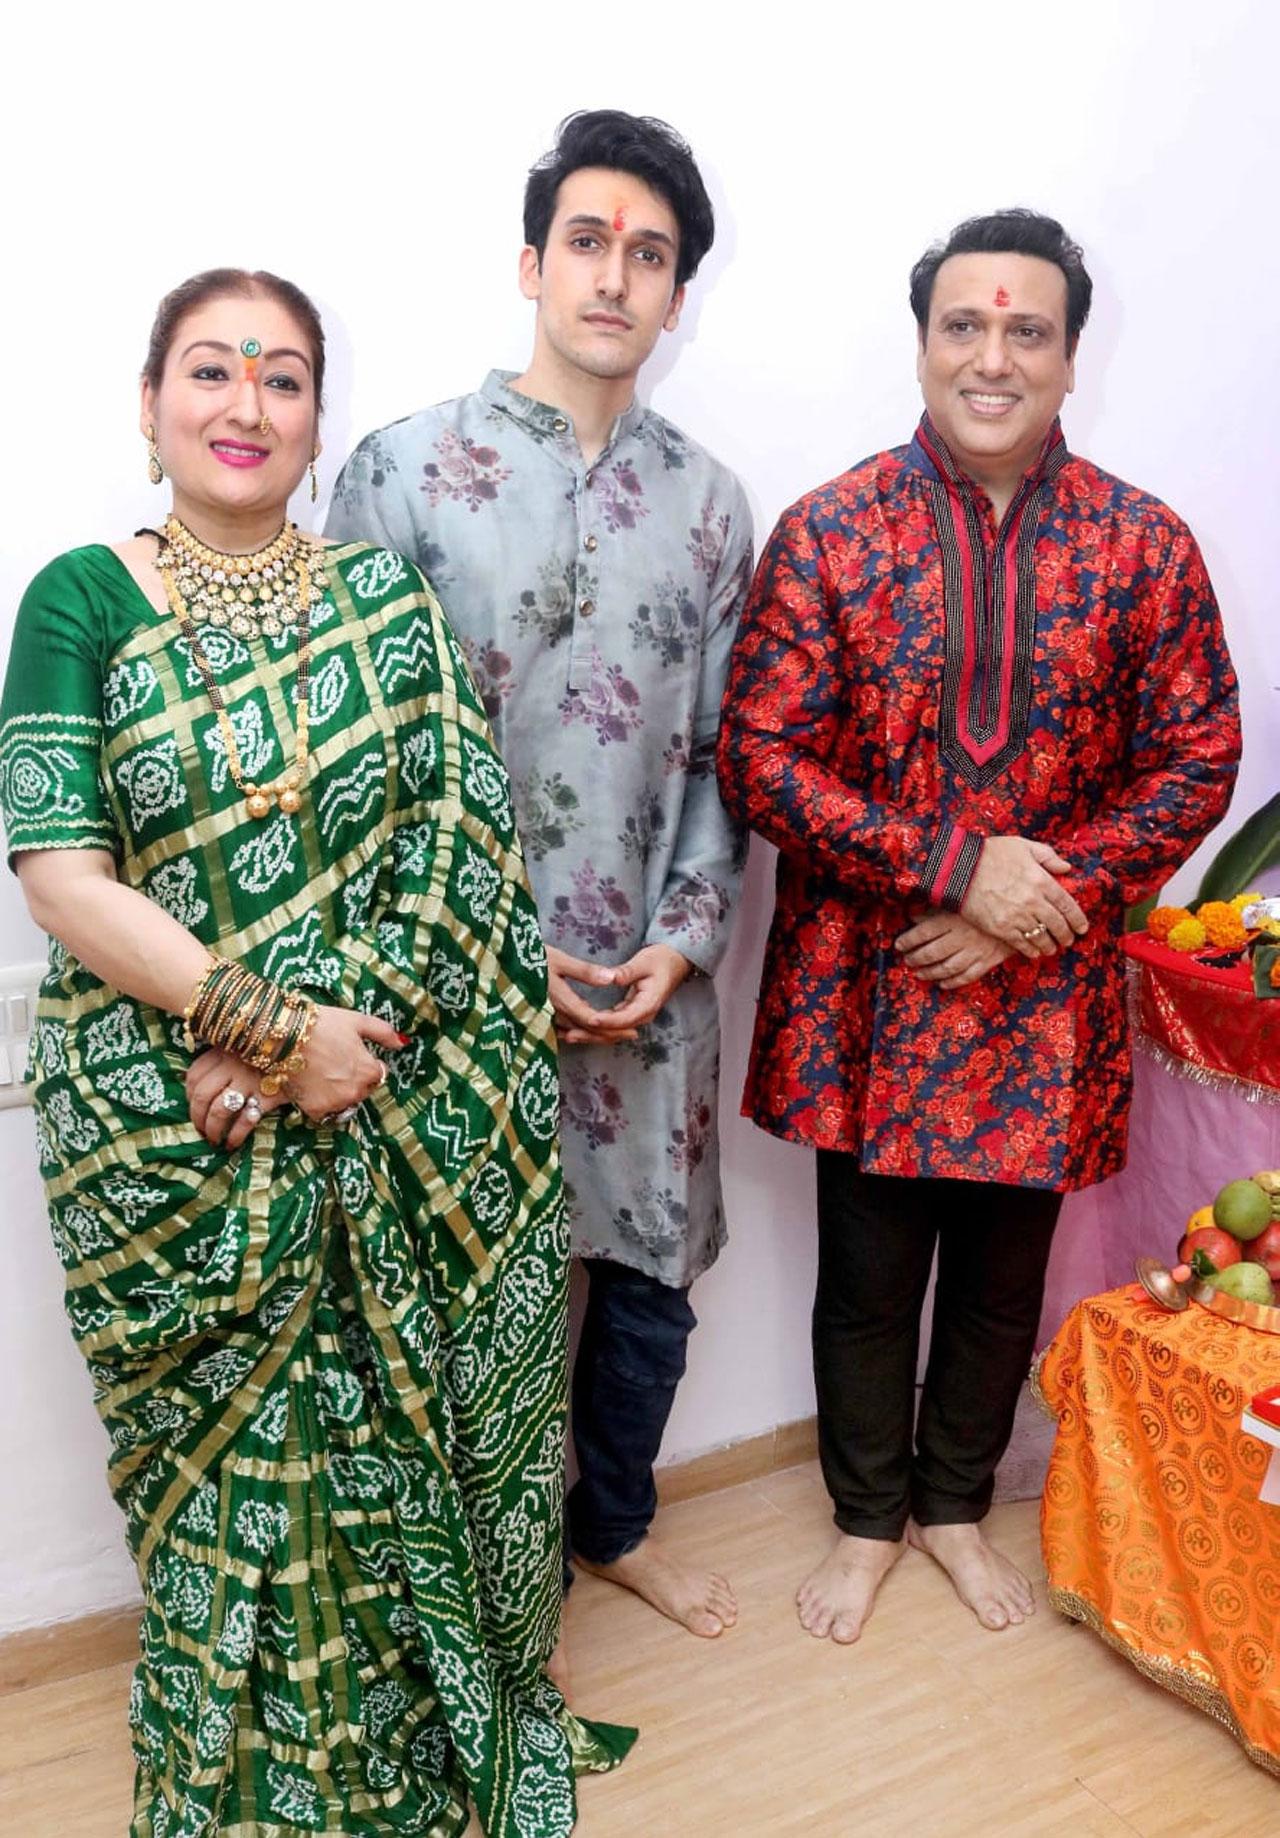 Govinda, religiously celebrates Ganesh Chaturthi every year, and this year was no exception. He celebrated the festival this year with his son and wife Sunita Ahuja.